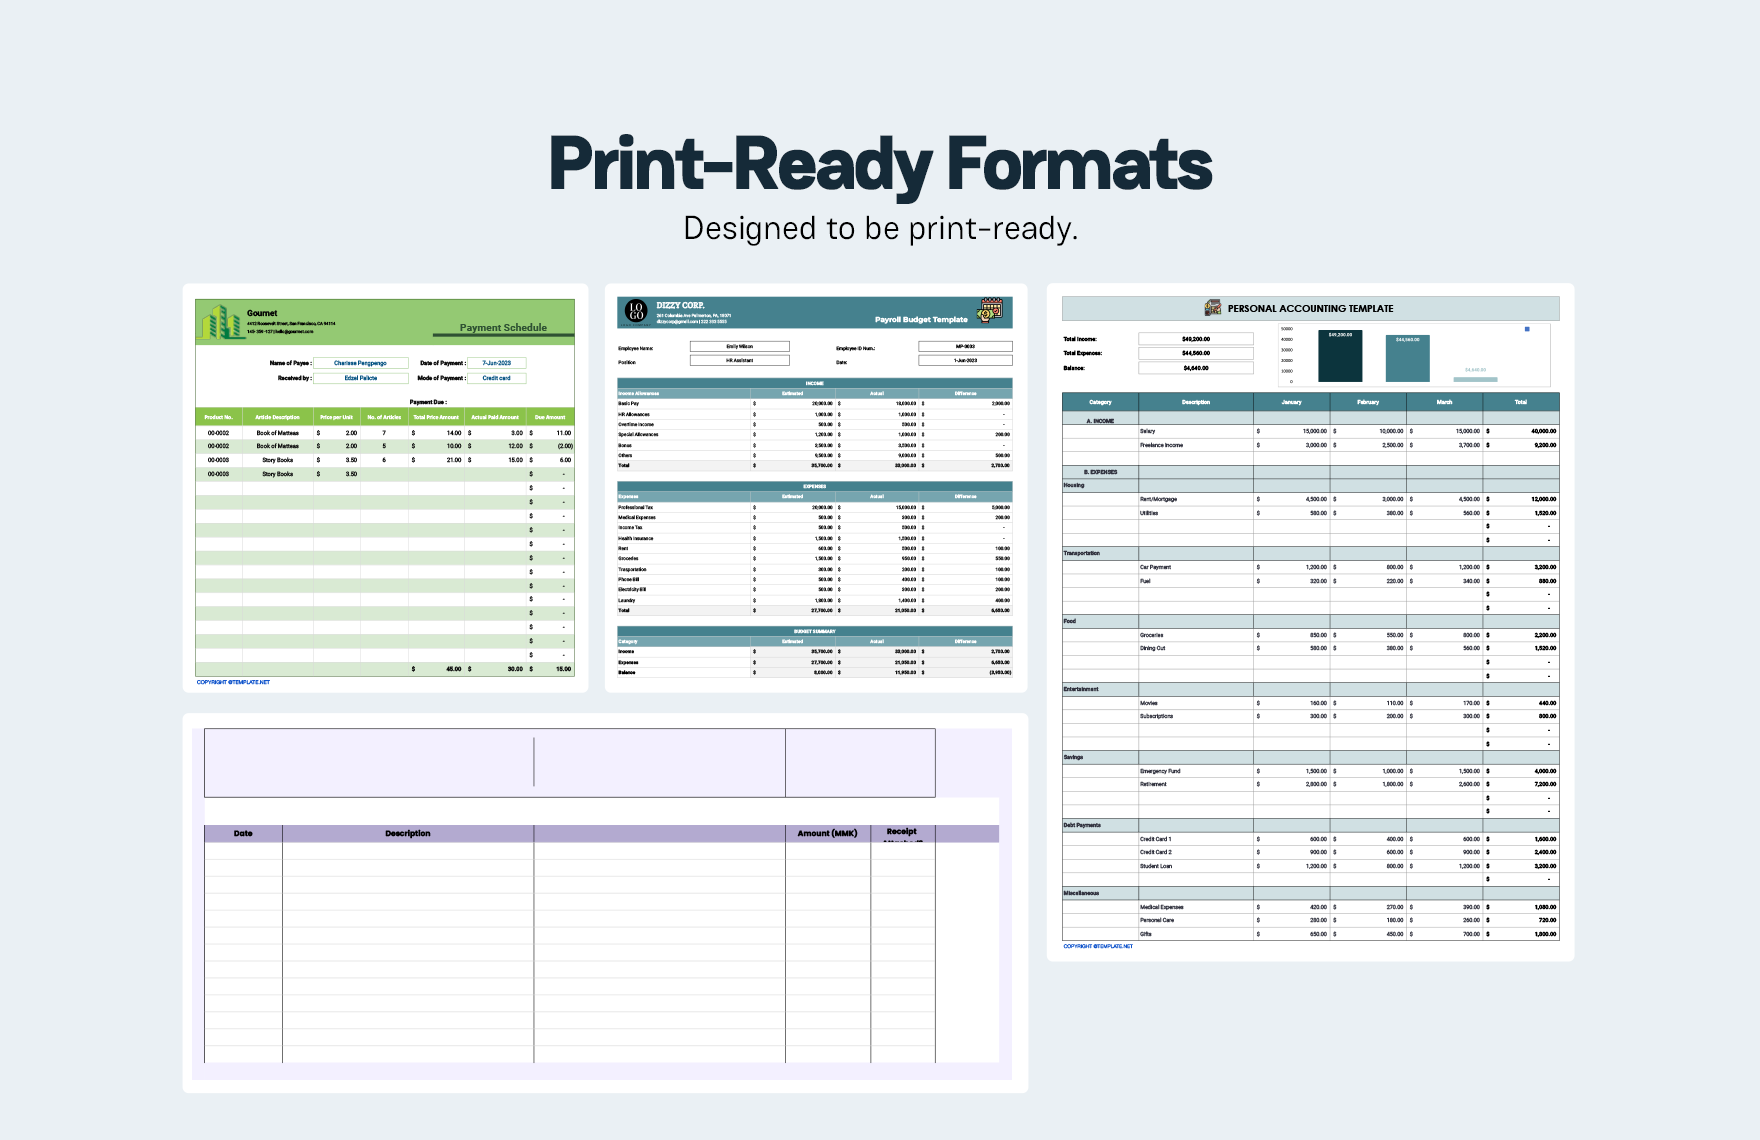 60+ Ultimate Accounting Template Bundle